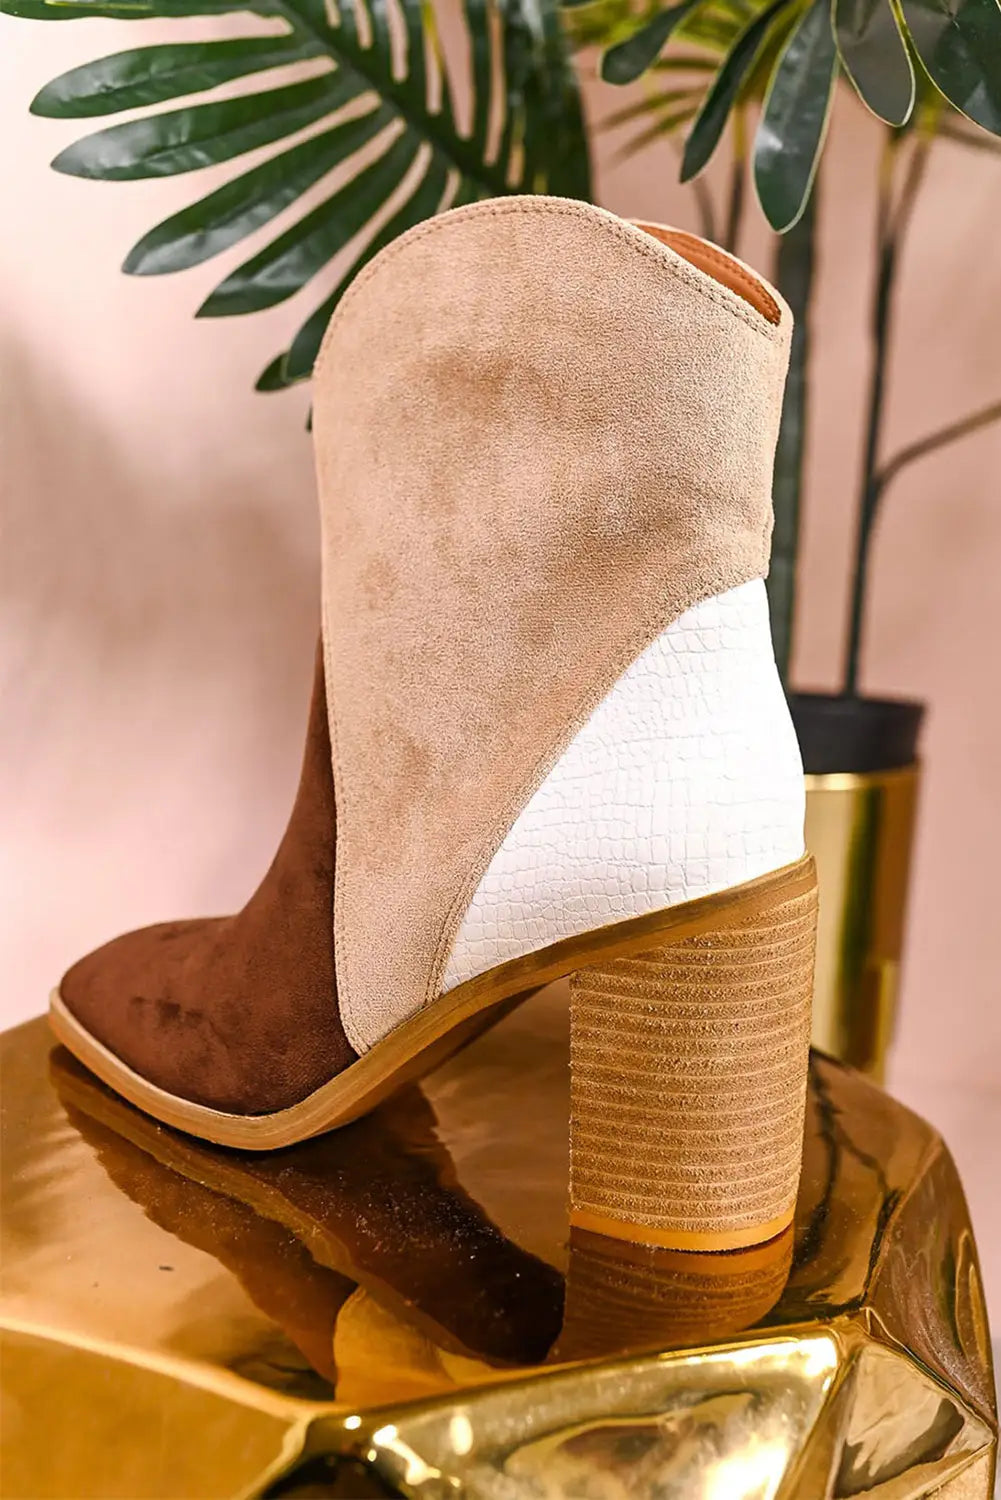 Chestnut colorblock suede heeled ankle booties - boots